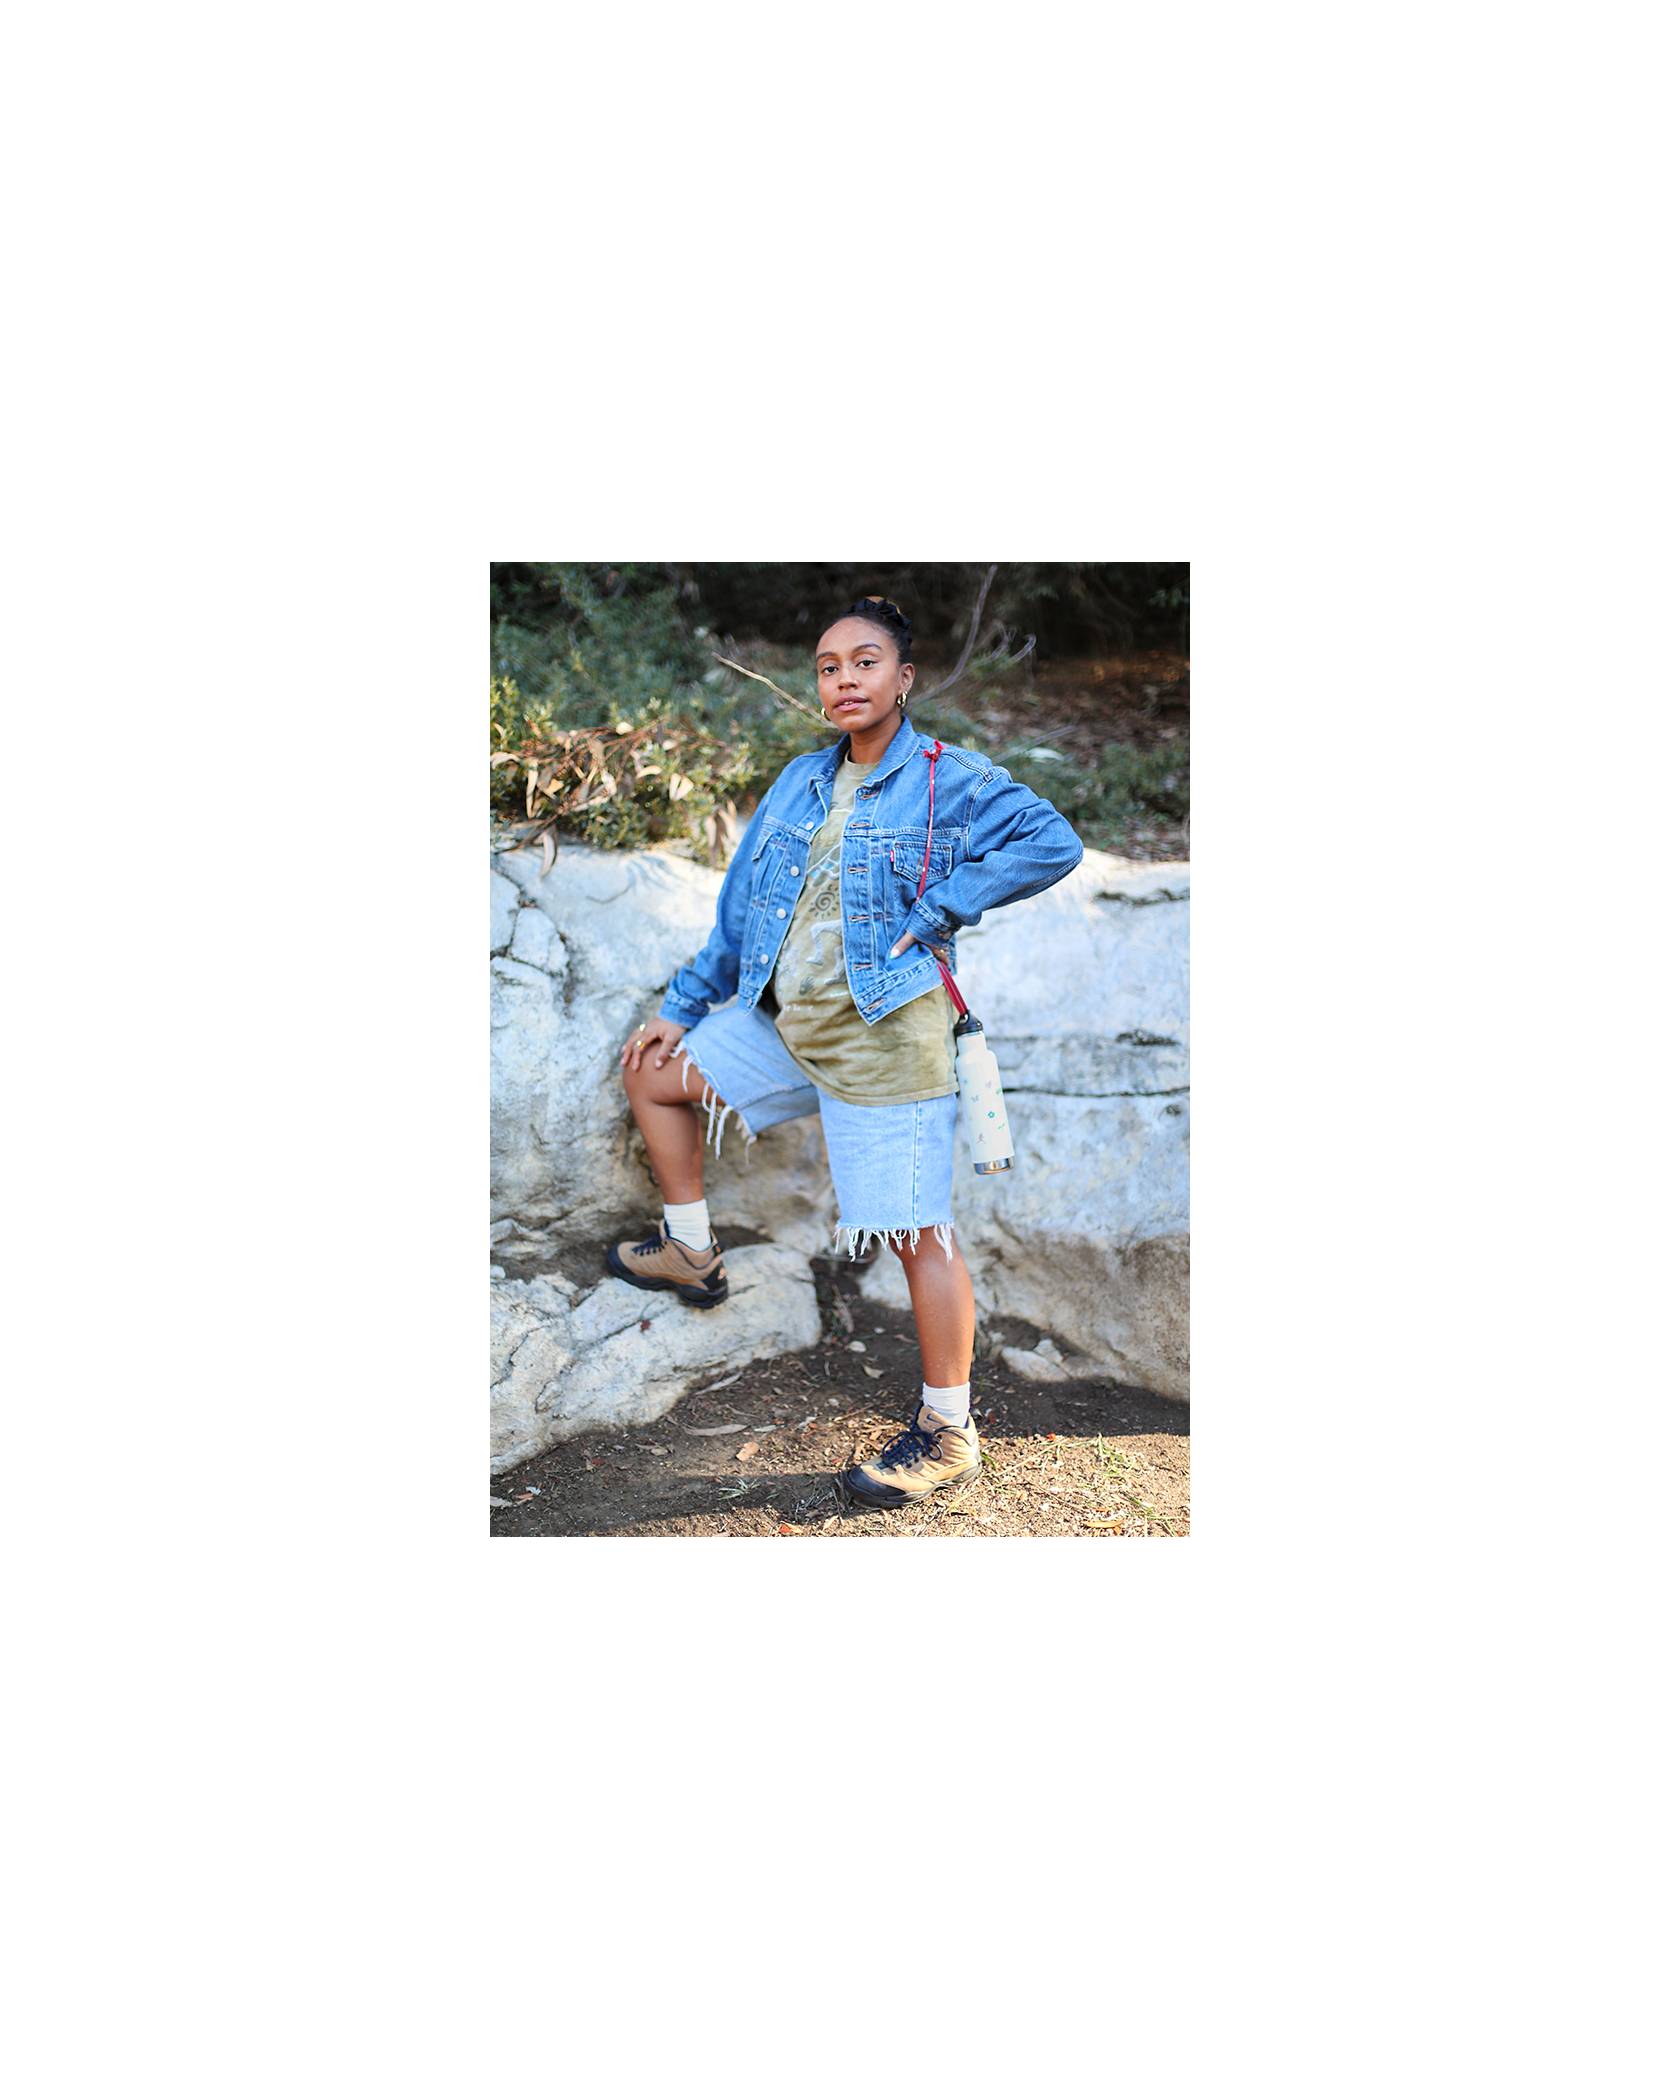 Photo of Evelynn Escobar-Thomas outdoors, wearing a Levi's Trucker Jacket, a tie-dye shirt, and denim cut-offs with hiking shoes.